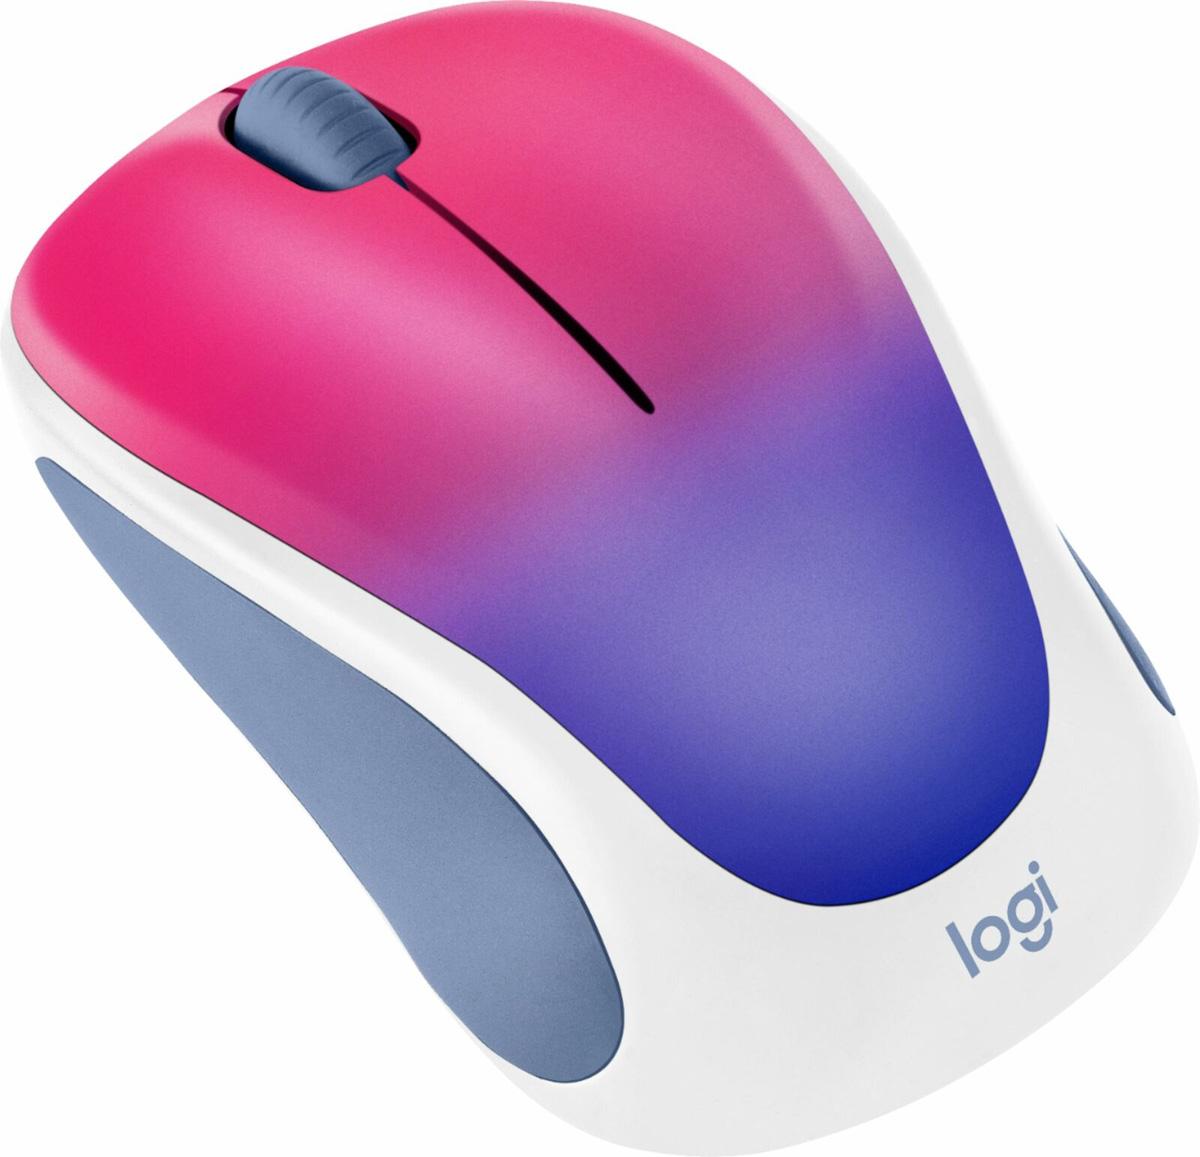 Logitech Design Collection Wireless Optical Mouse for $9.99 Shipped